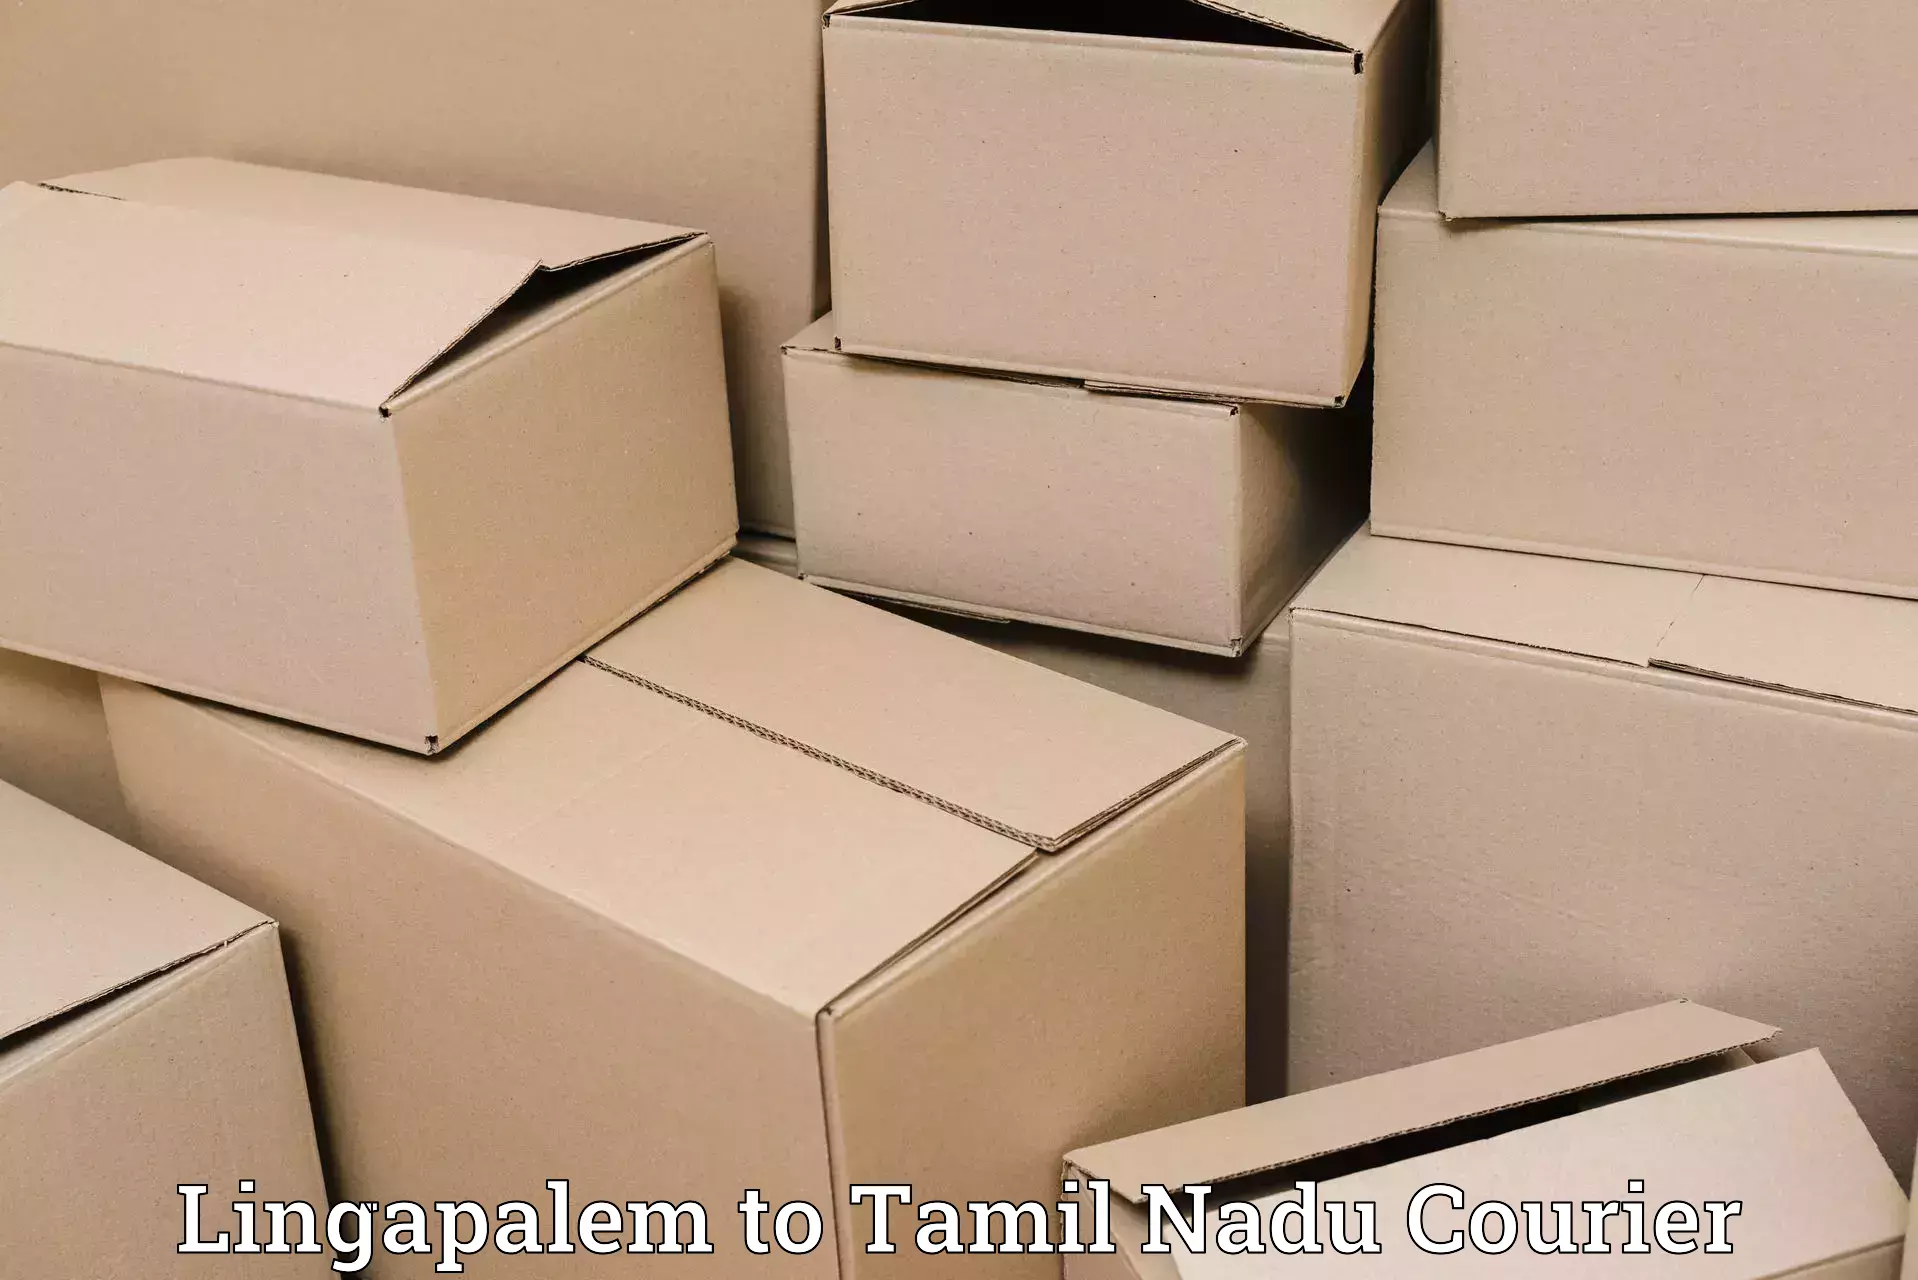 Package delivery network Lingapalem to Ambattur